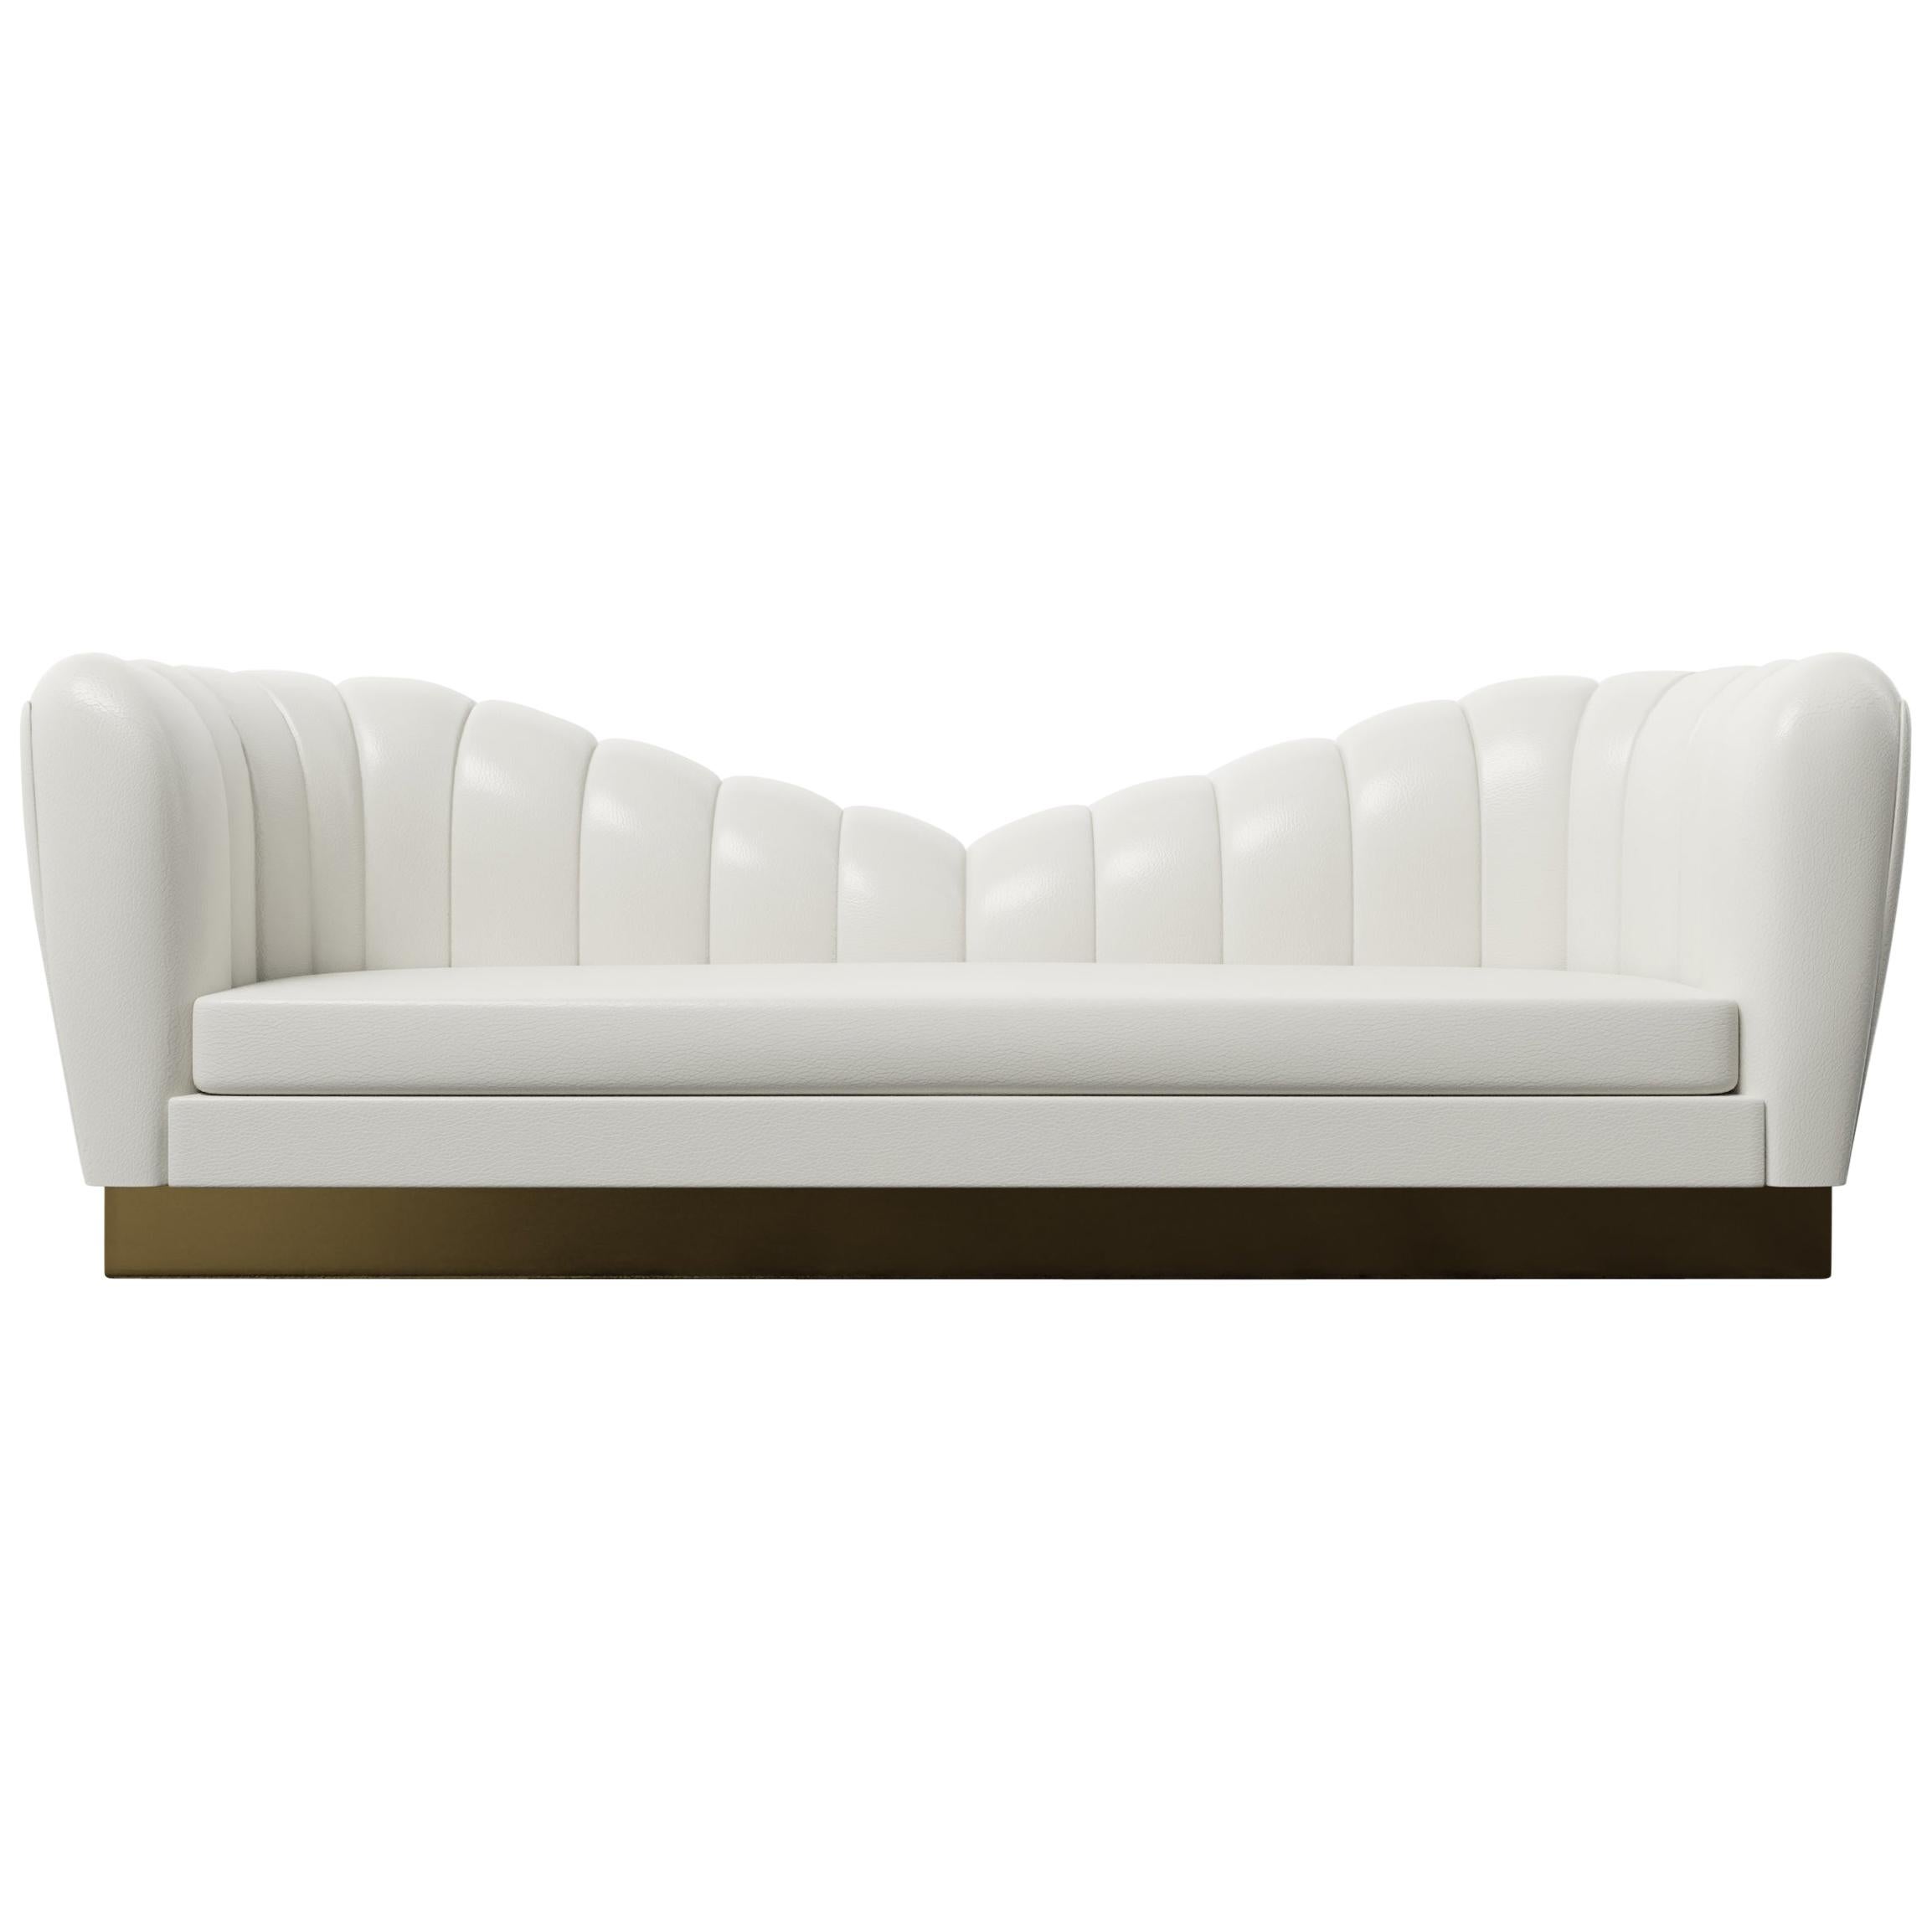 GUINEVERE SOFA - Modern Symmetrical Sofa in Faux White Leather with Metal Plinth